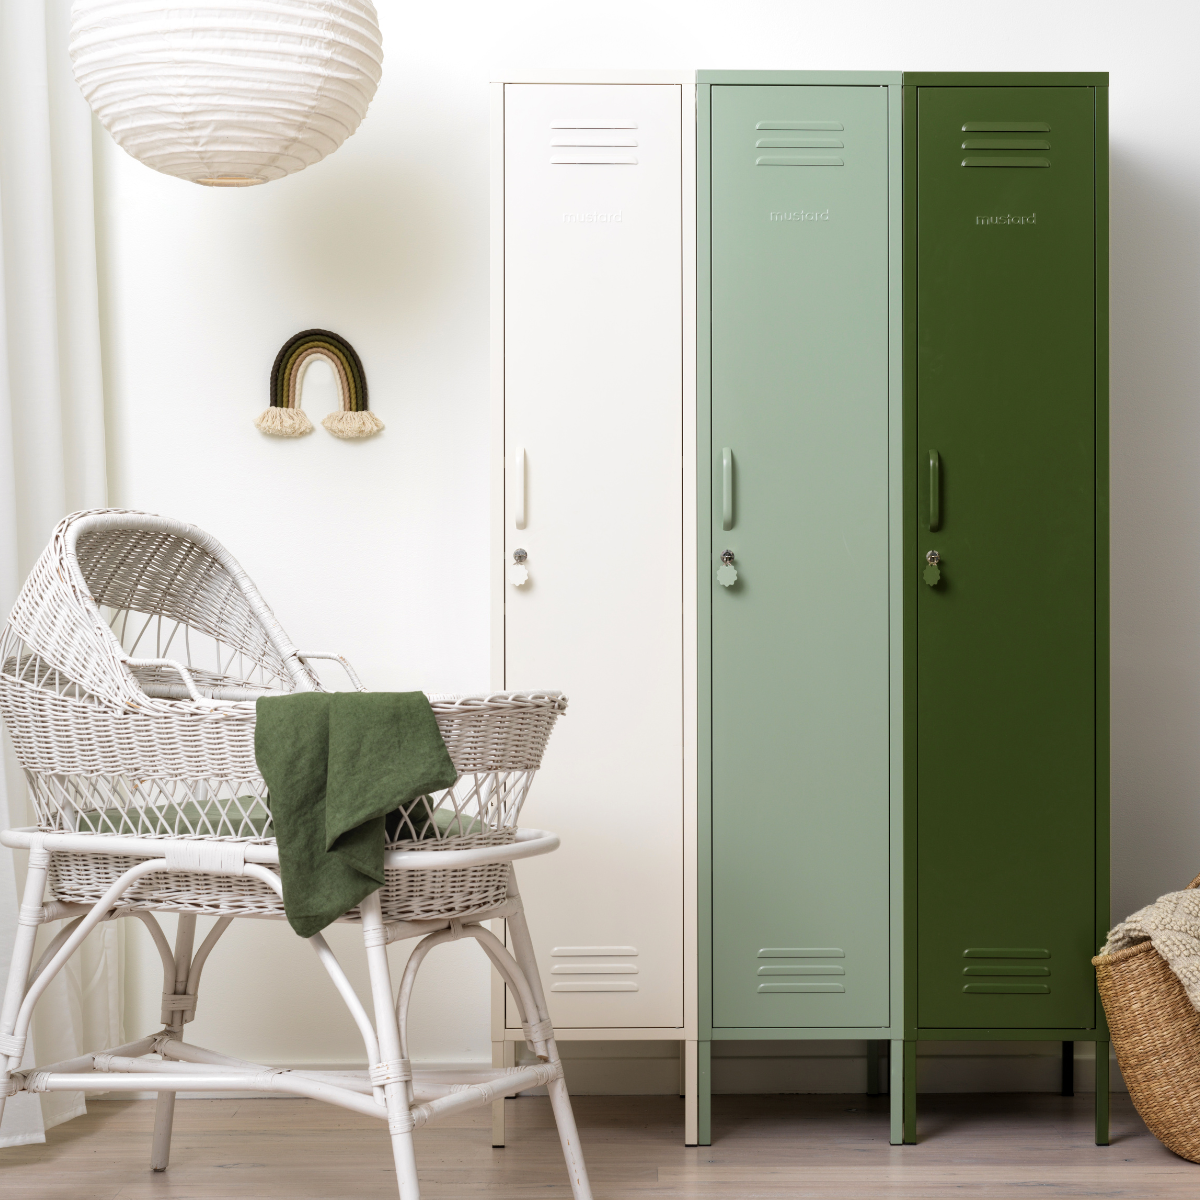 Three Mustard Made Skinny lockers stand side by side. Each is a different colour. From the left, it is White, Sage and then Olive. To the left of the lockers is a white, rattan bassinet with light green bed linen. A large round pendant light hangs above this. 